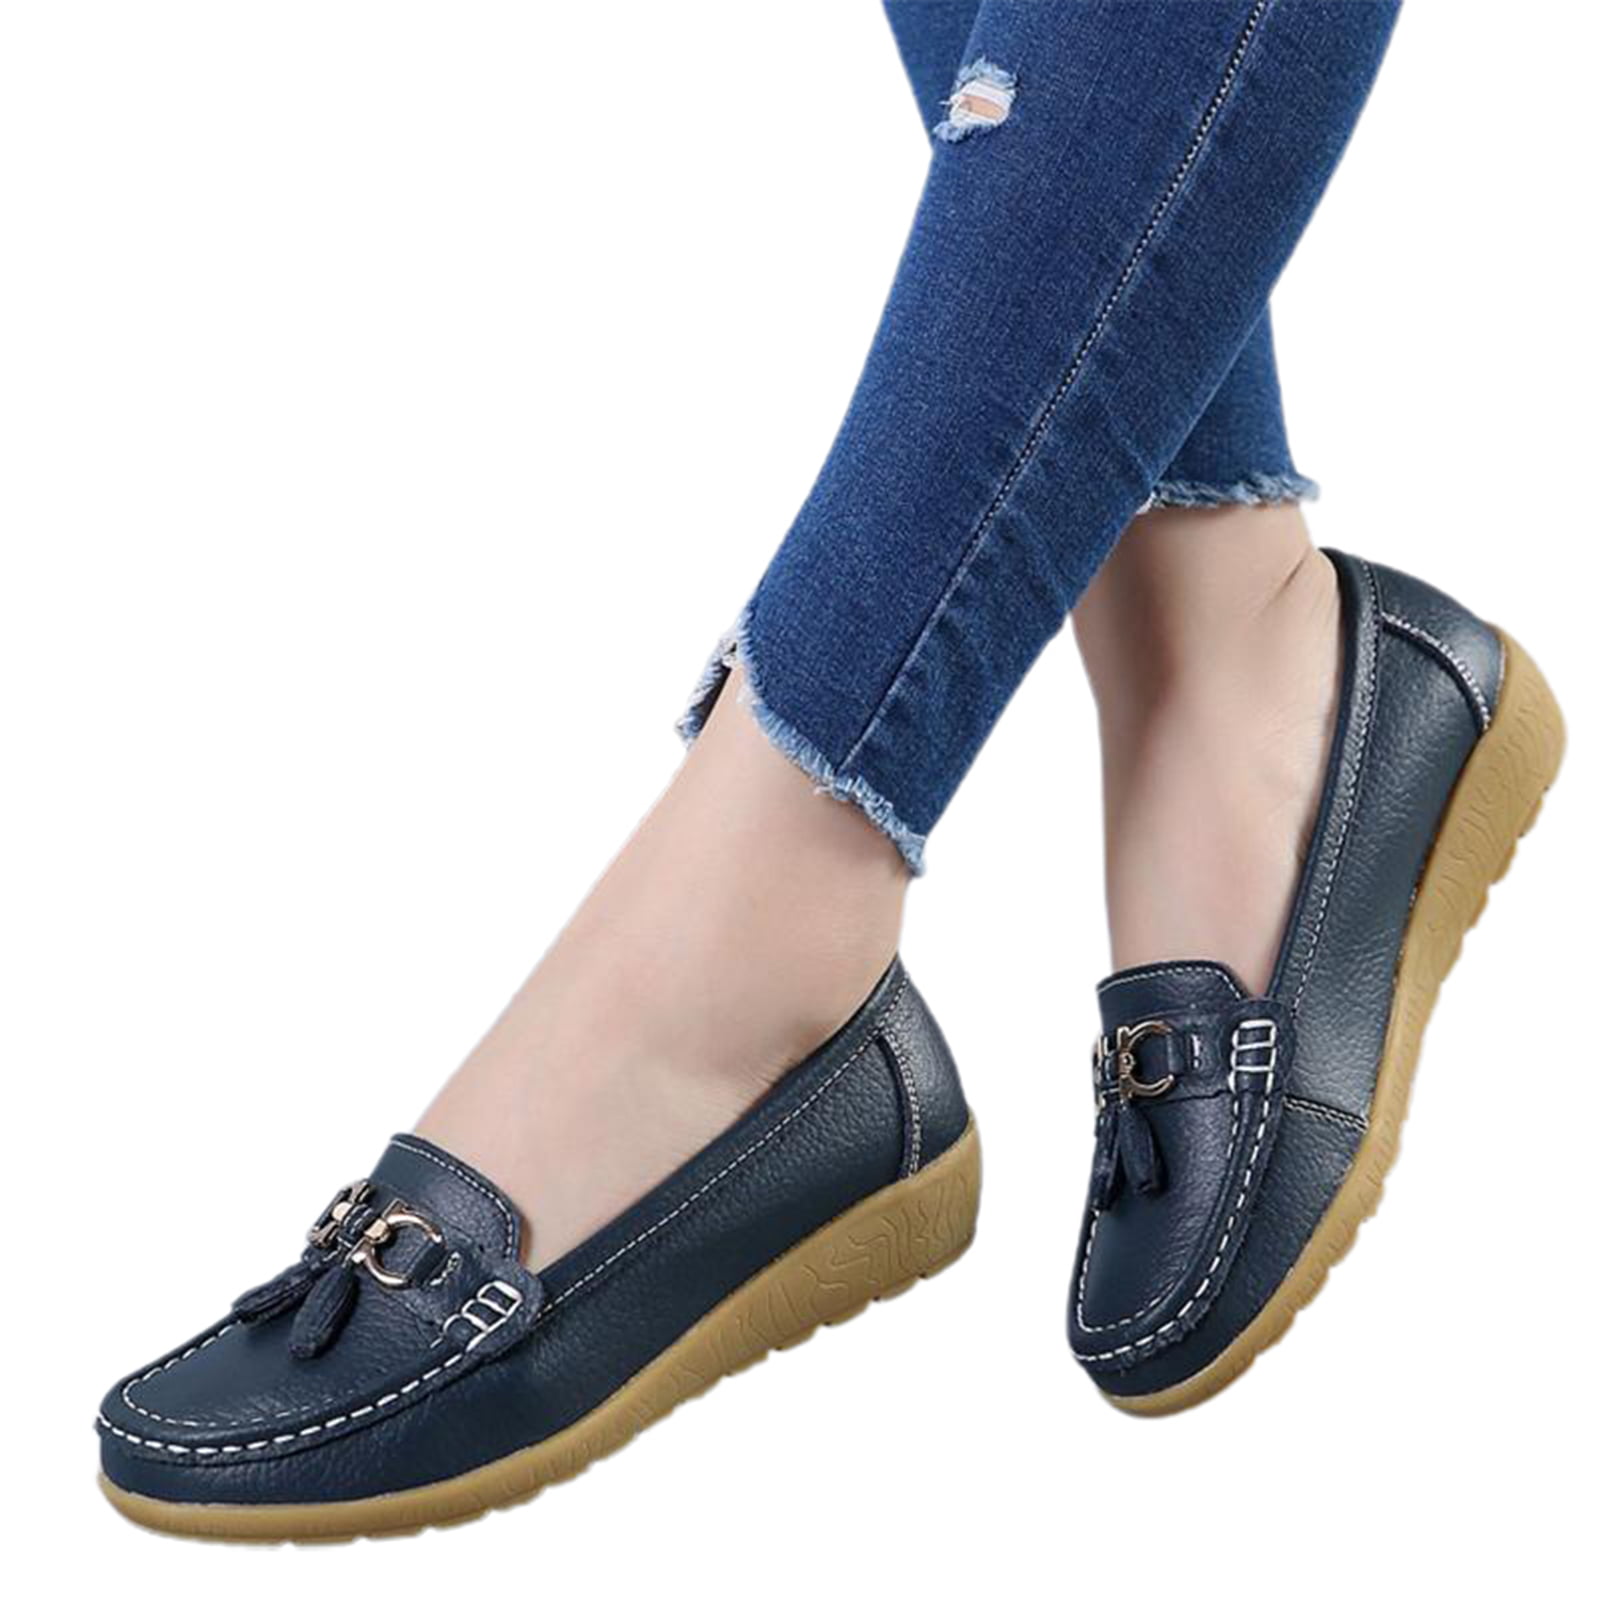 Women Casual Ballet Flats Shoes Comfort Slip On Boat Loafers Shoes Single Shoes 